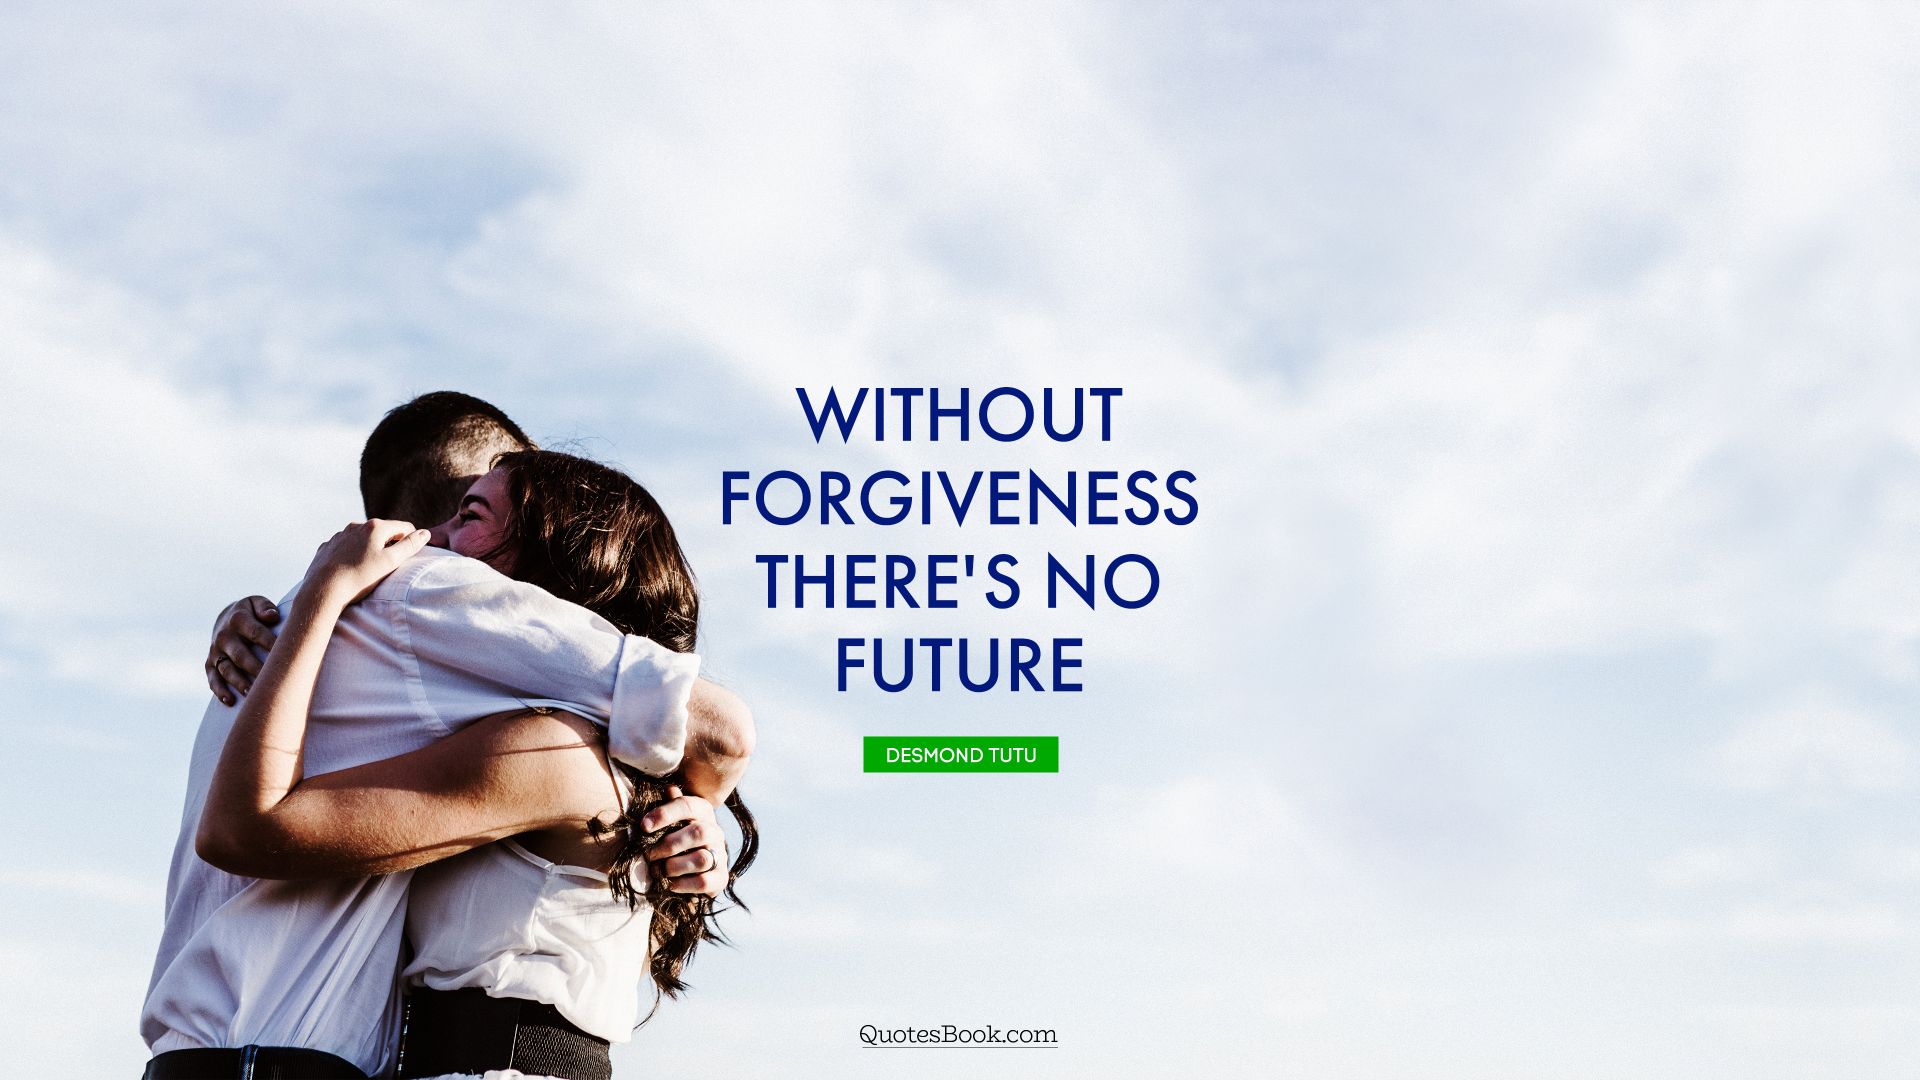 Without forgiveness, there's no future. - Quote by Desmond Tutu